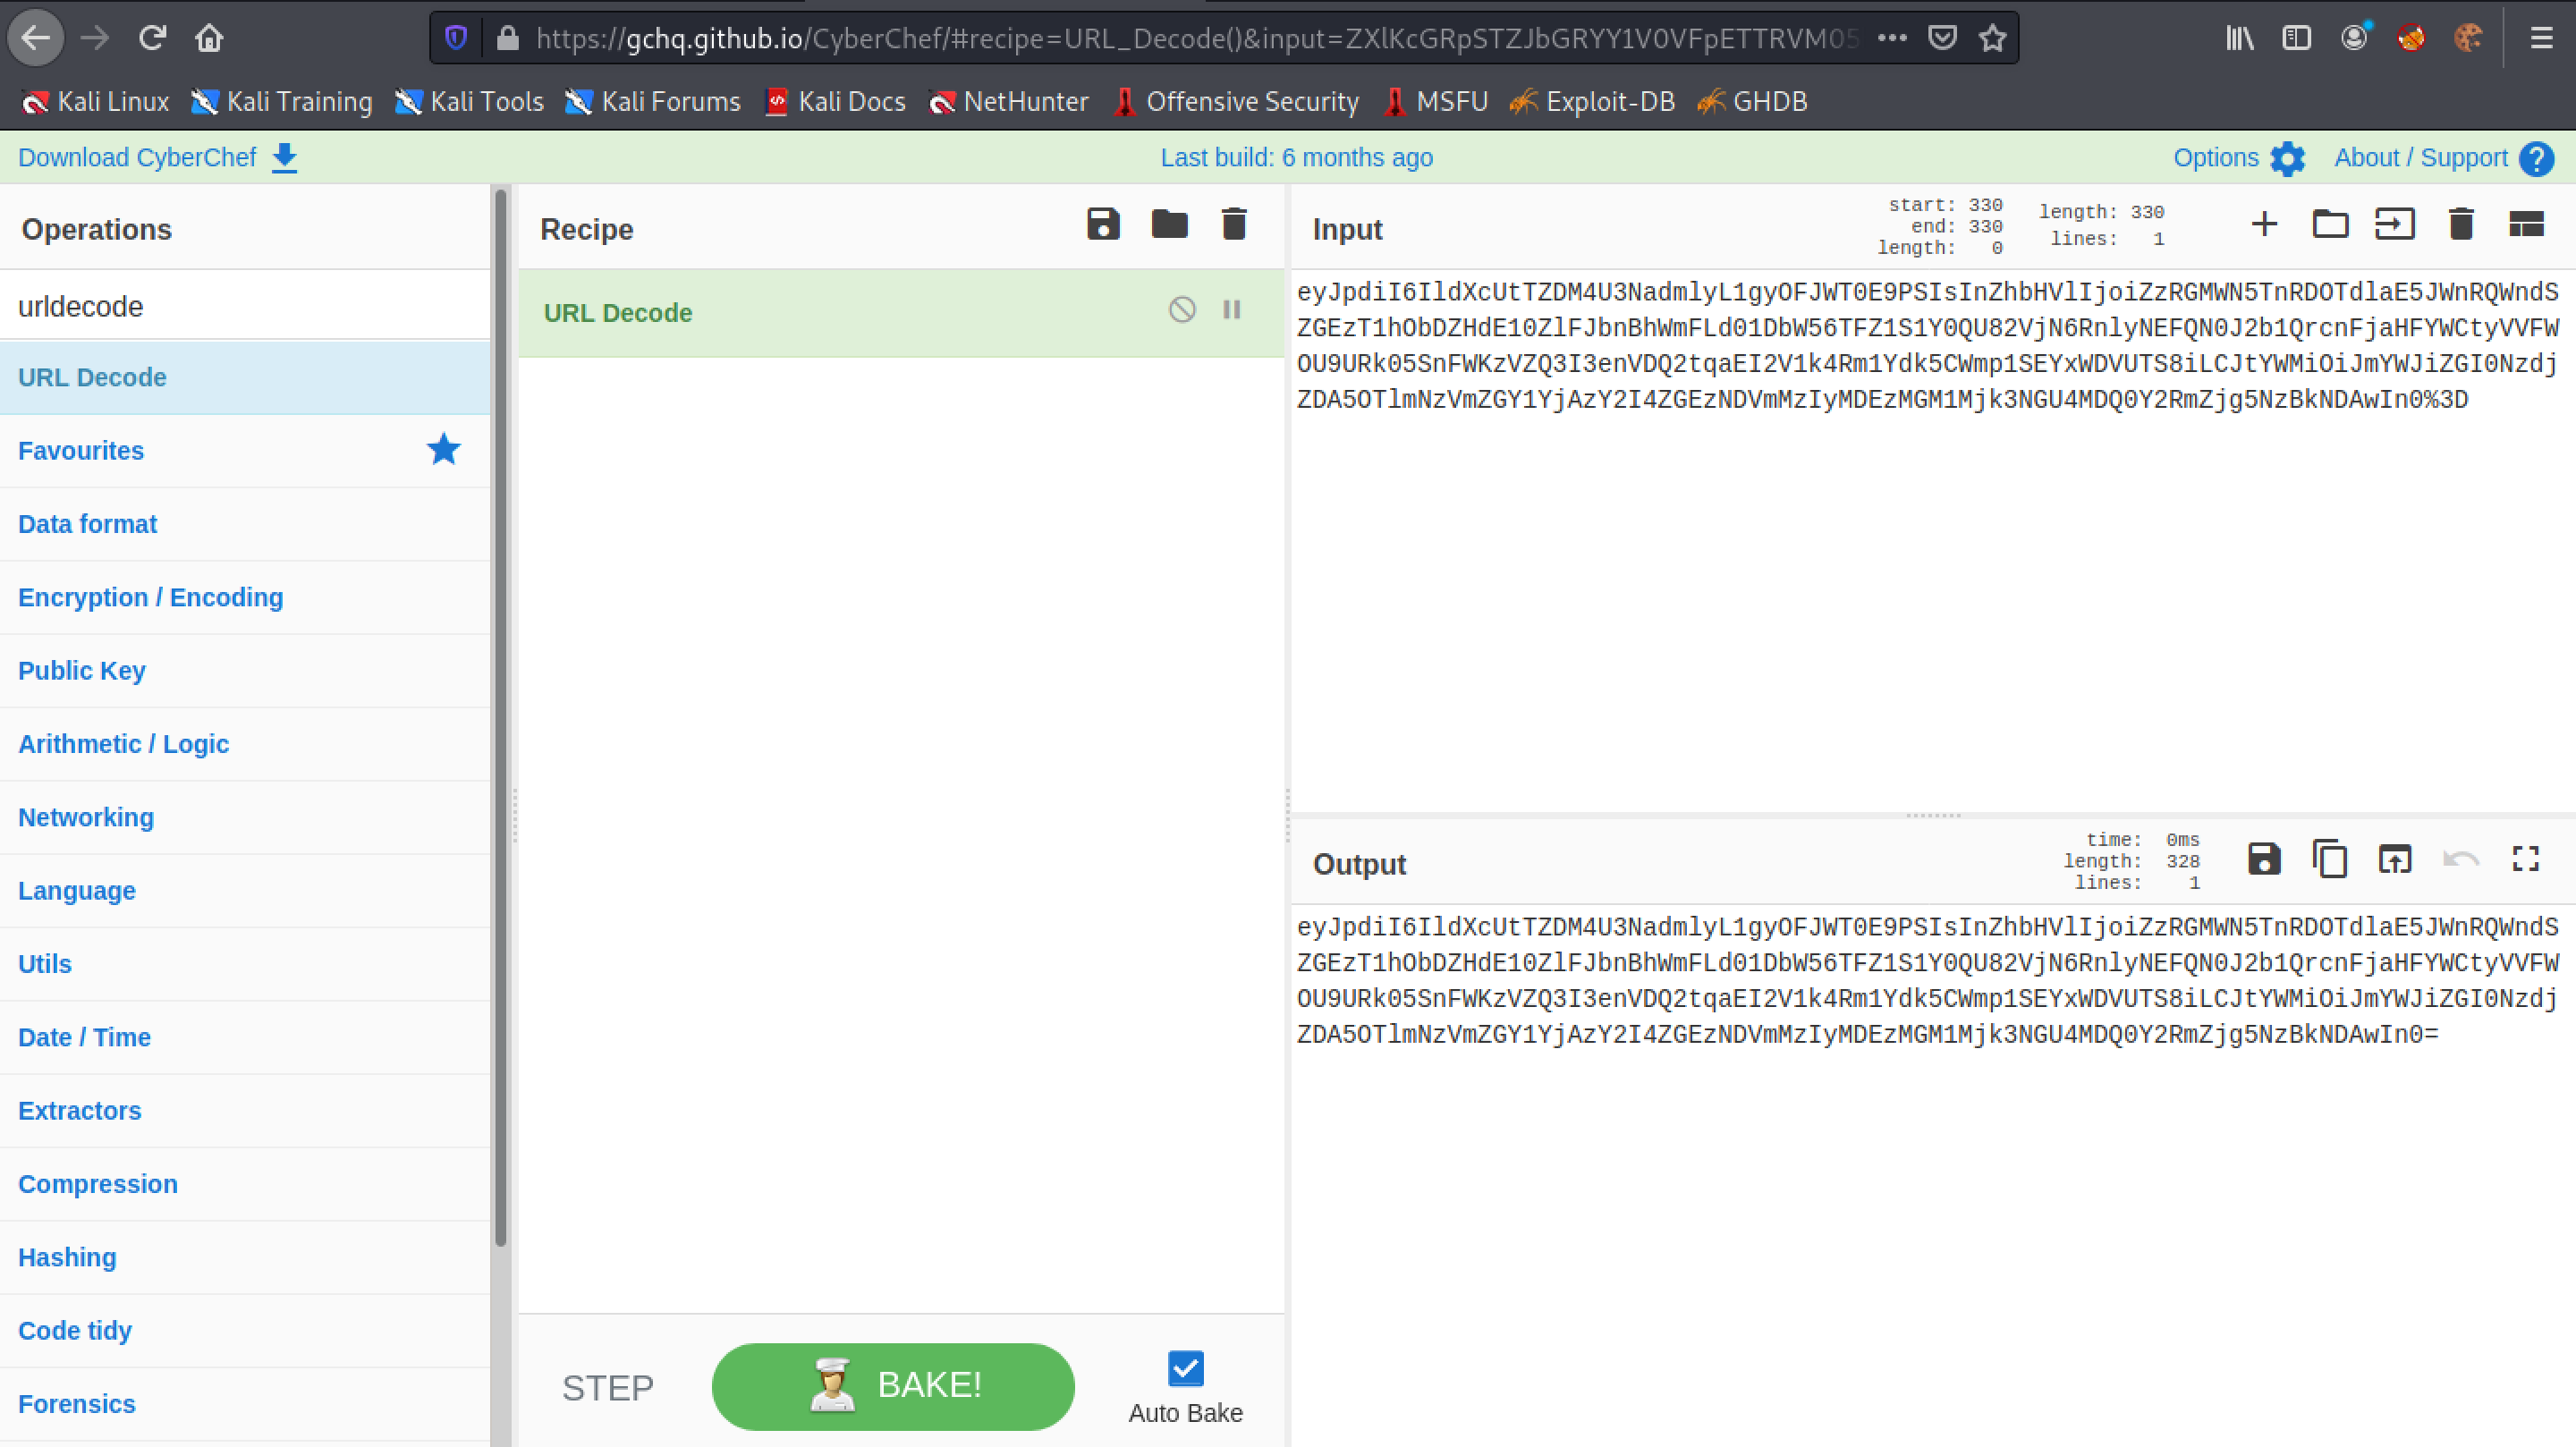 URL decoding the session cookie in CyberChef.